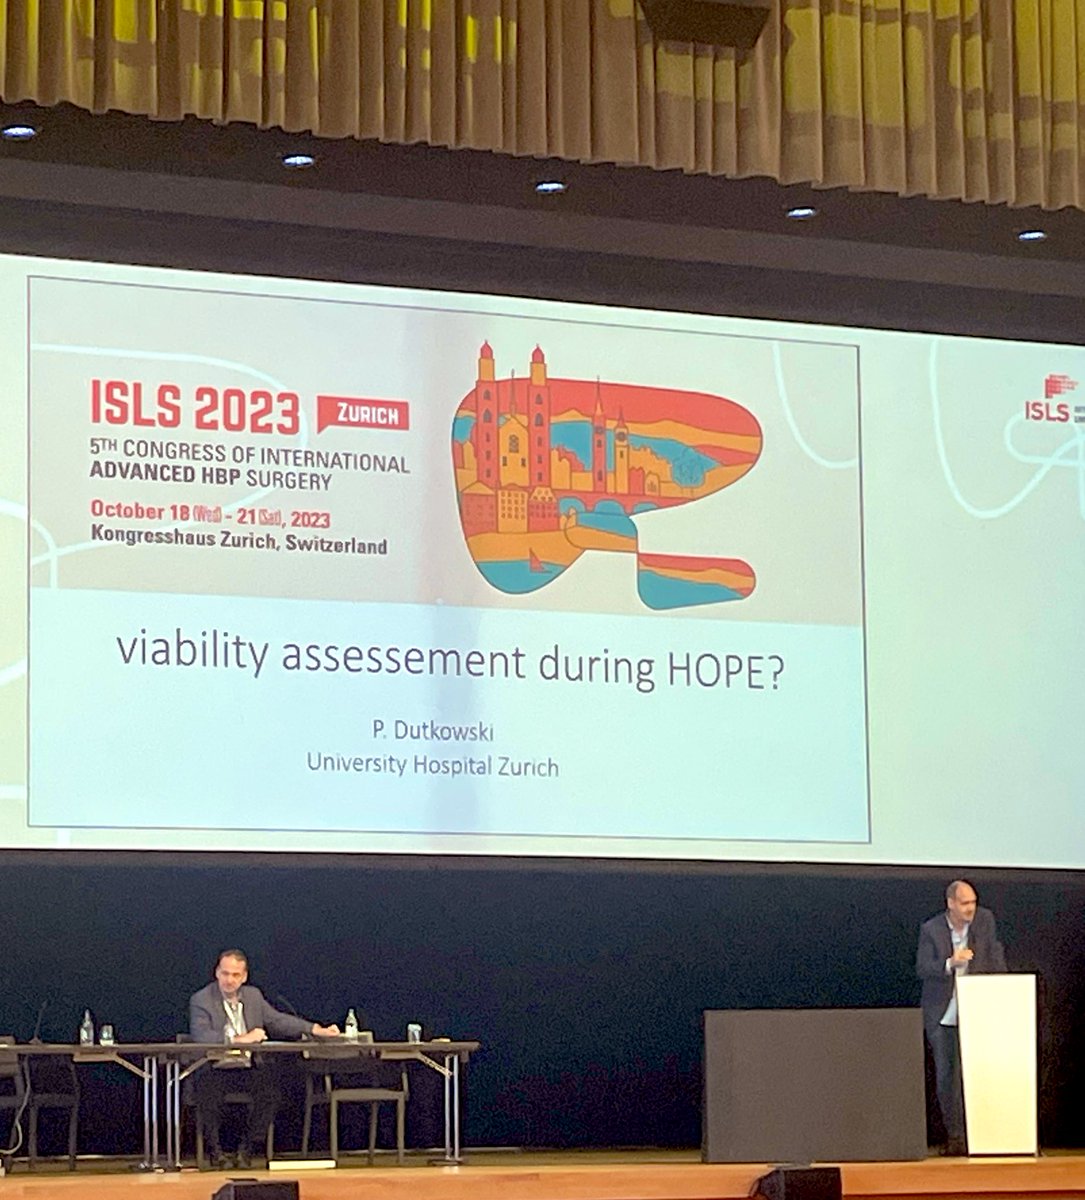 🇨🇭First day of the 5th Congress of International Advanced HPB Surgery in Zürich

💥Highlights💥
Robot&laparoscopic live surgery from Modena& Paris

Workshops on machine perfusion&IOUS

Huge enthusiasm for Robotic liver surgery

#isls2023 @ISLSSymposium